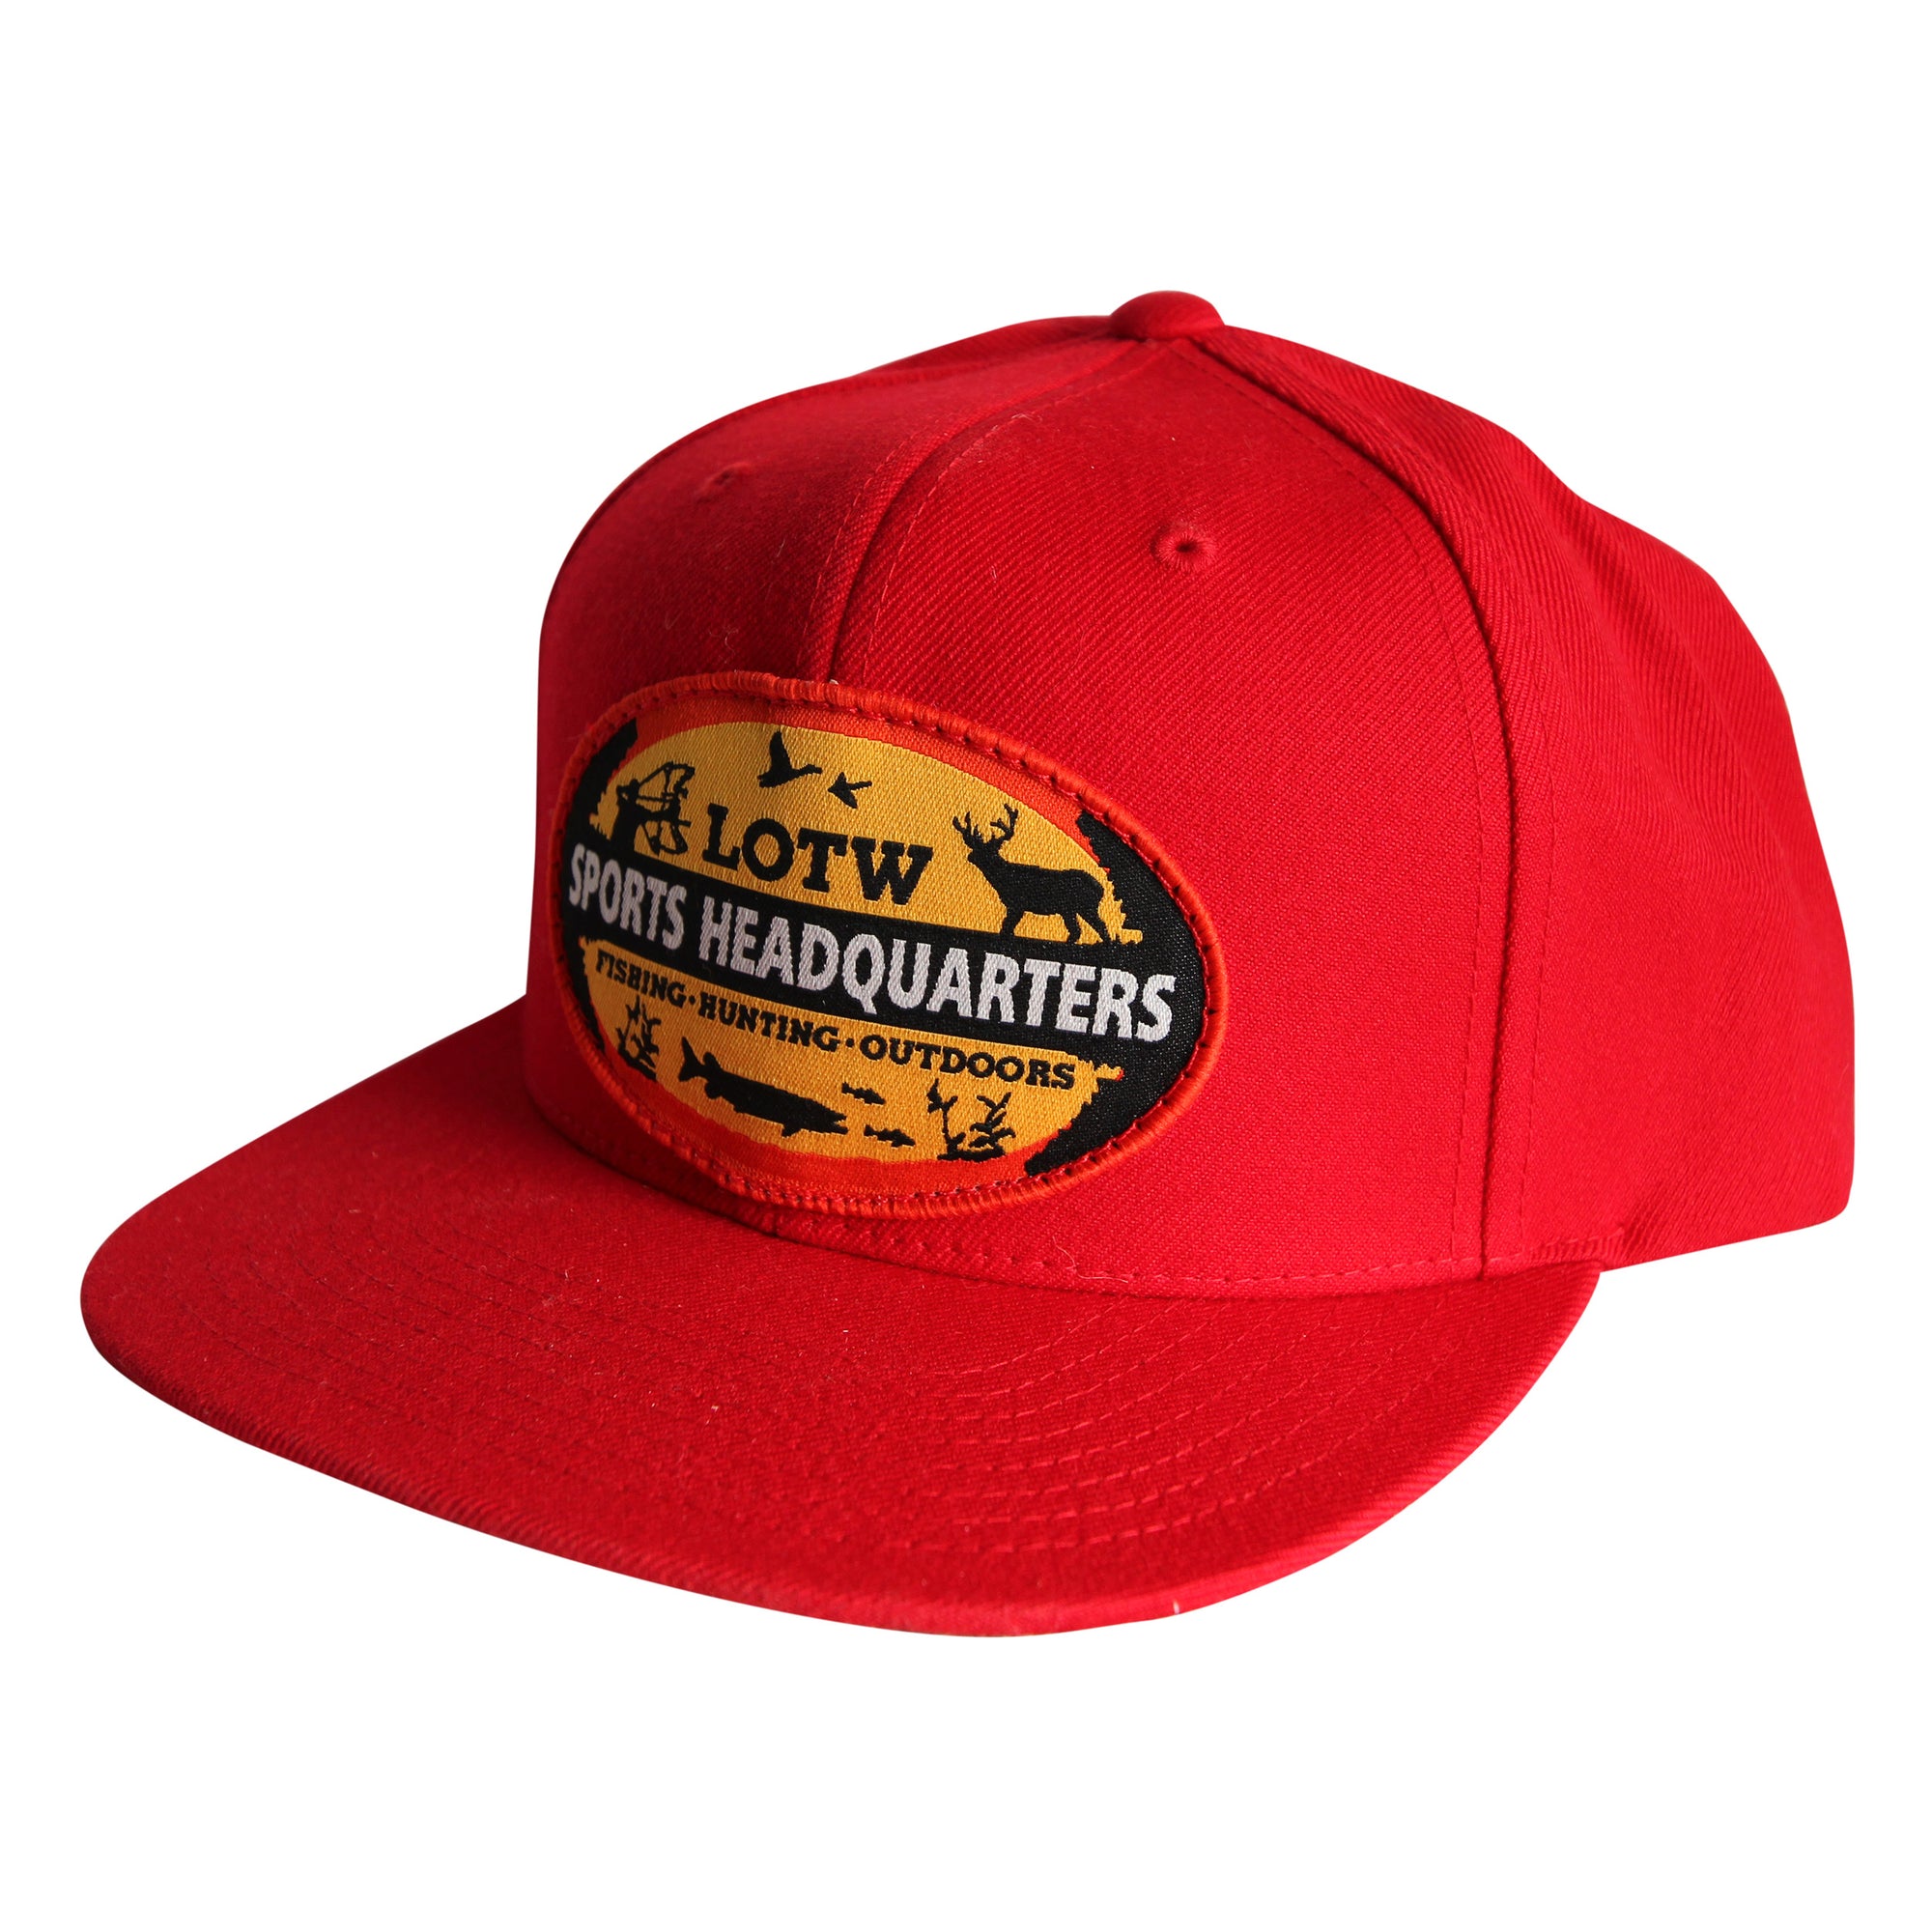 Best Selling Products Tagged Hat - LOTWSHQ